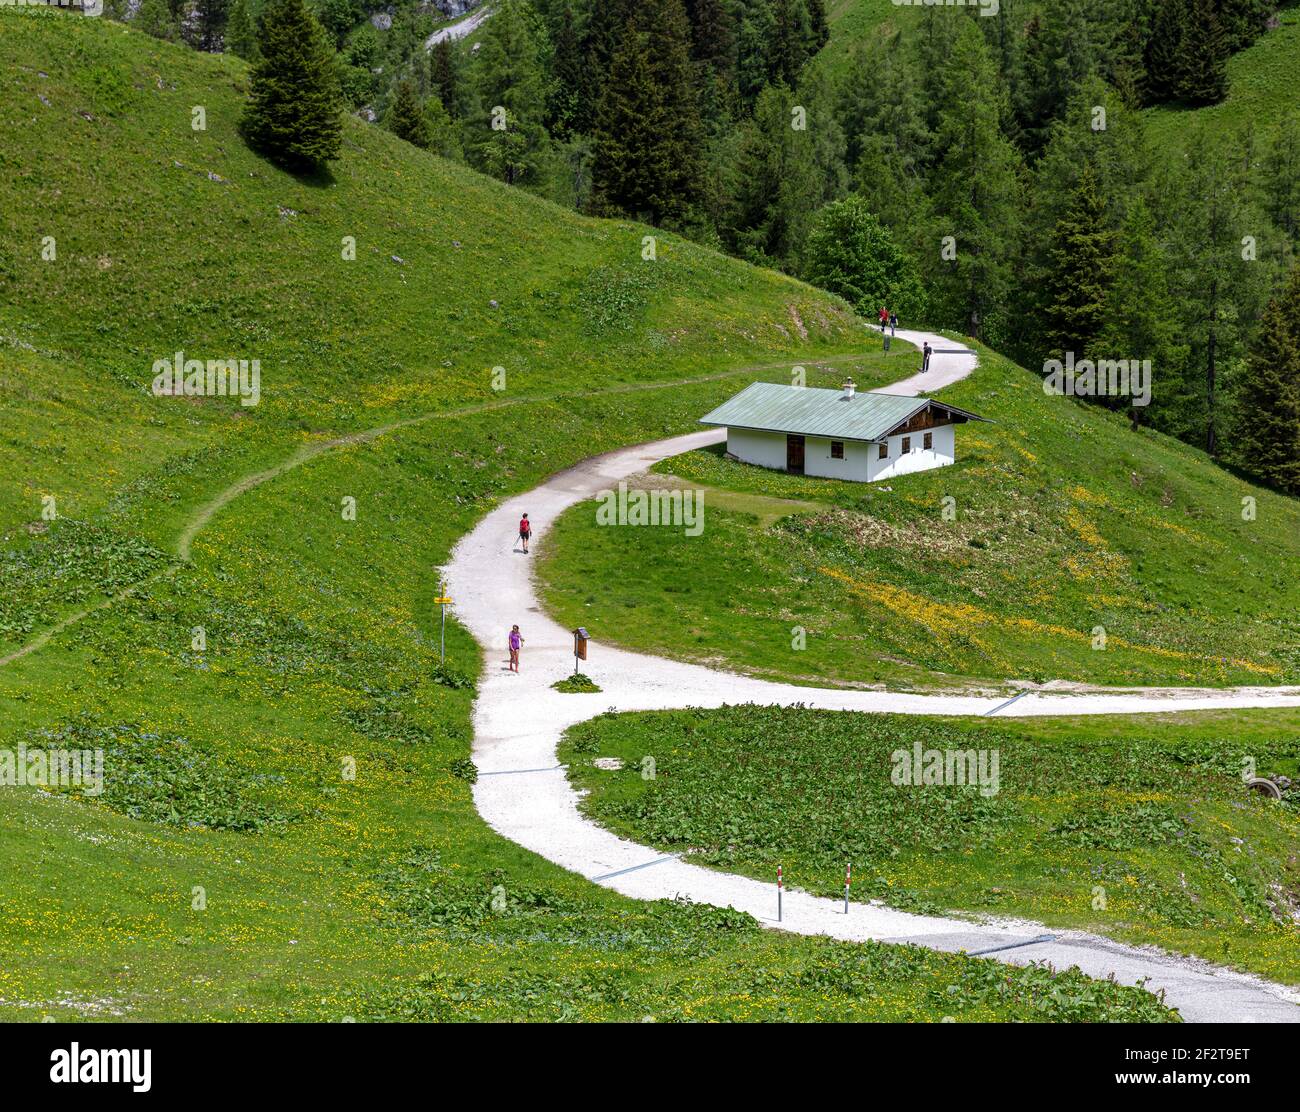 landscape at the jenner in berchtesgaden, bavaria, germany Stock Photo